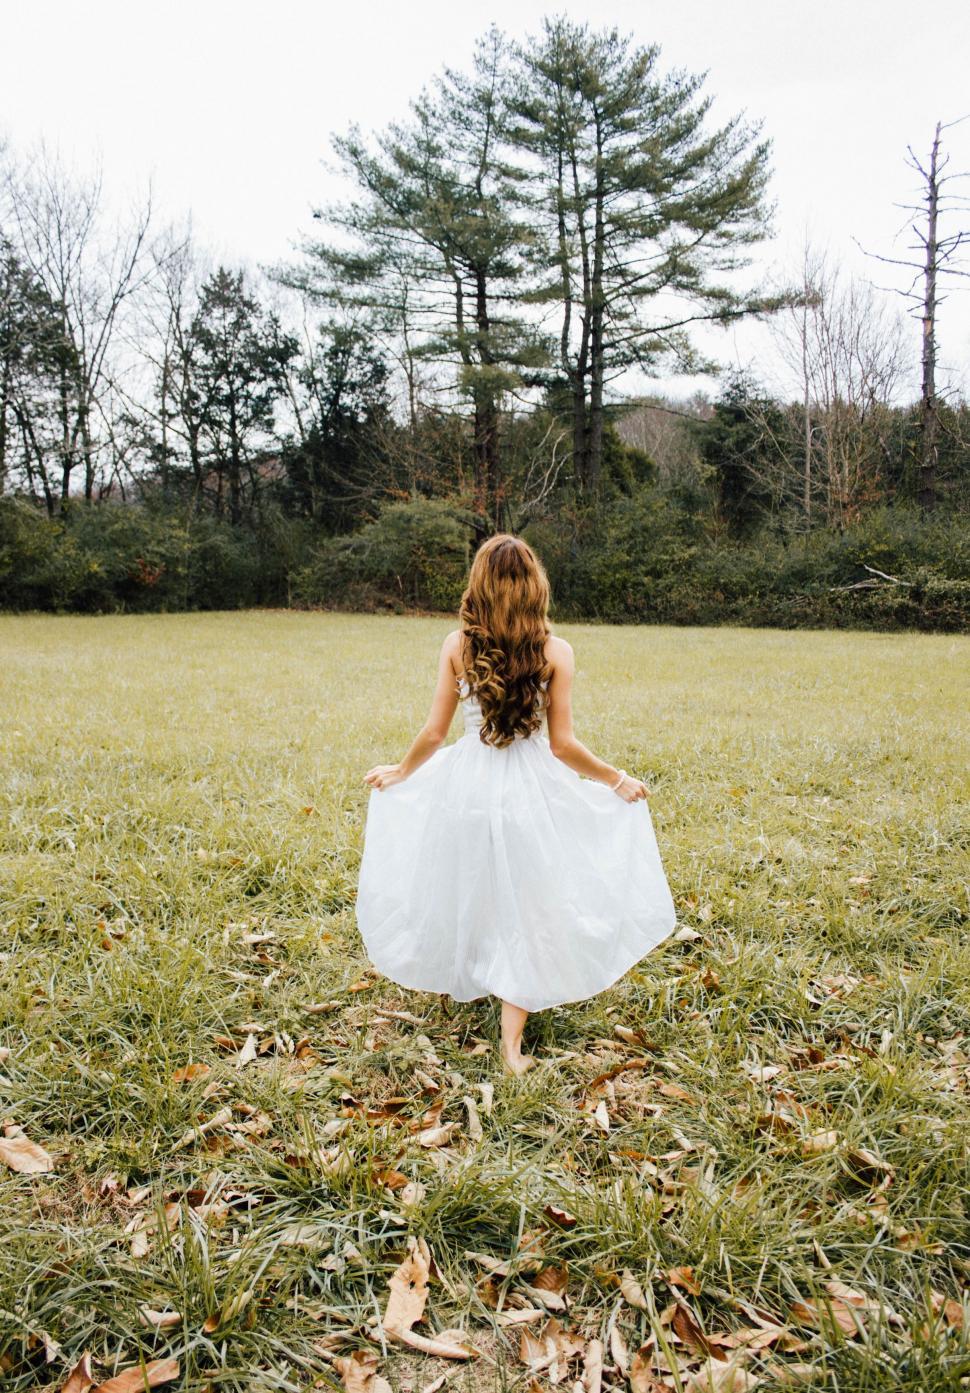 Free Image of Young Girl in White Dress Walking Through Field 